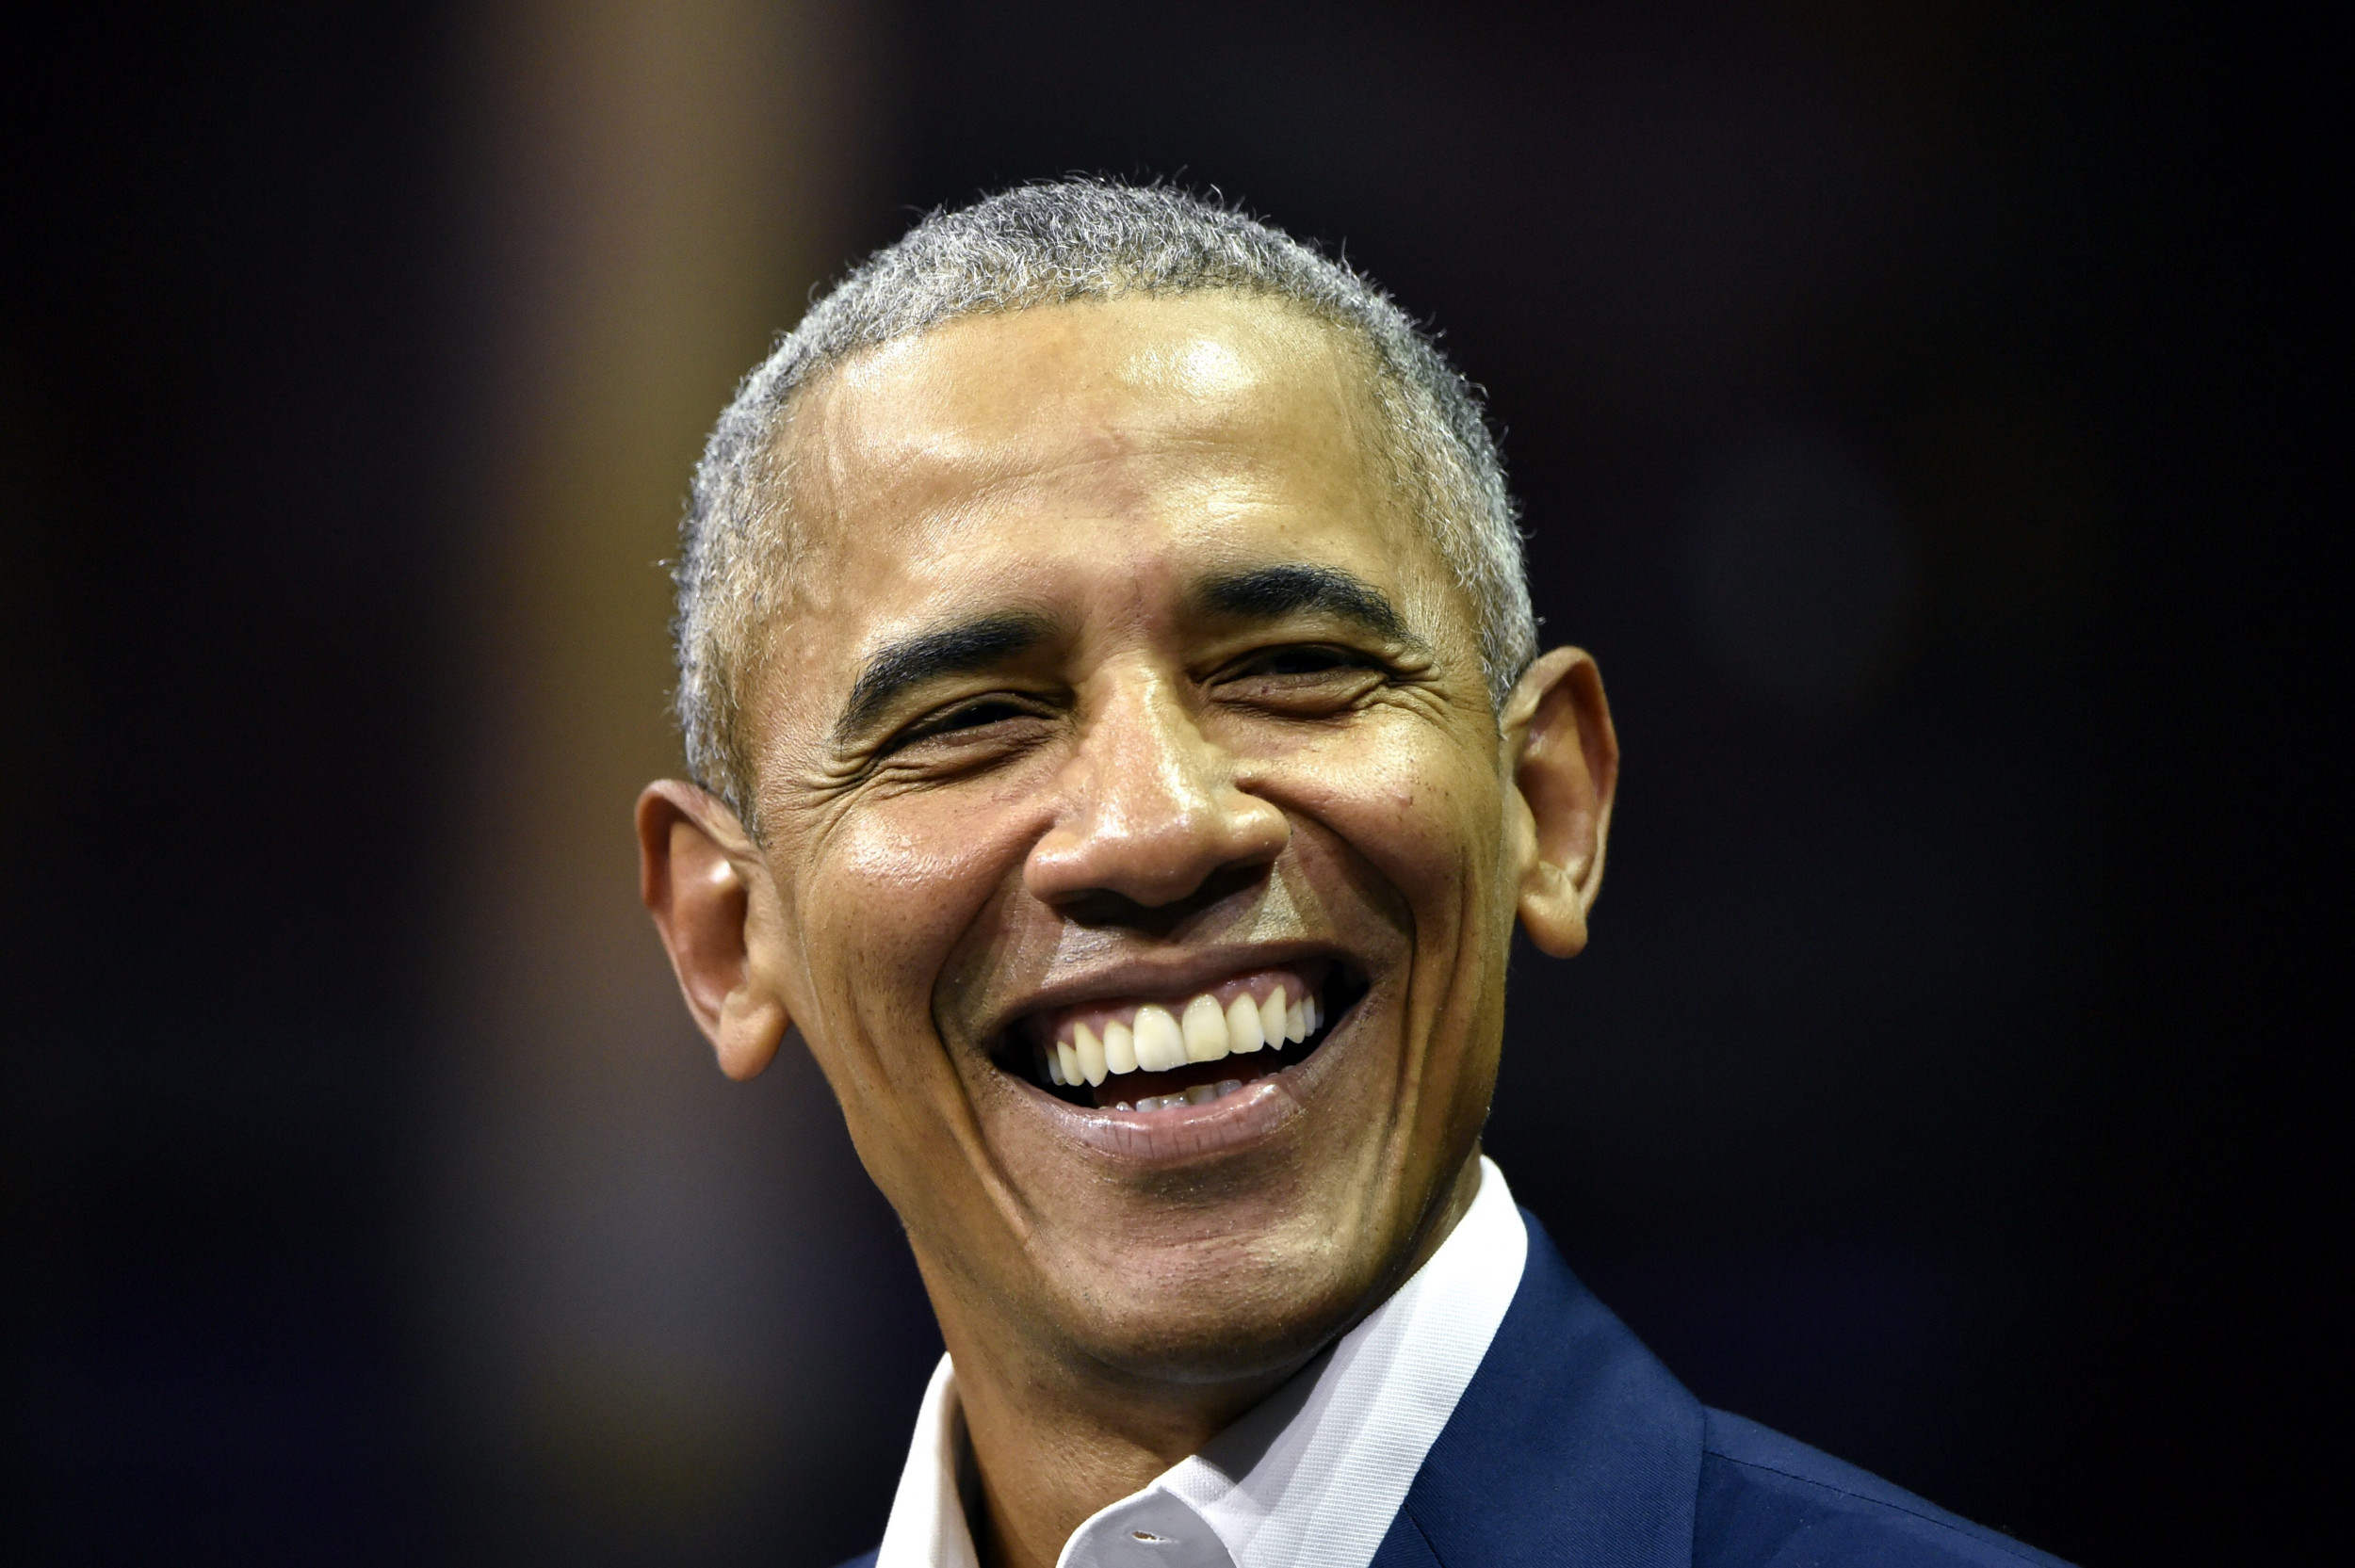 Barack Obama Birthday: Age, Facts About 44th President